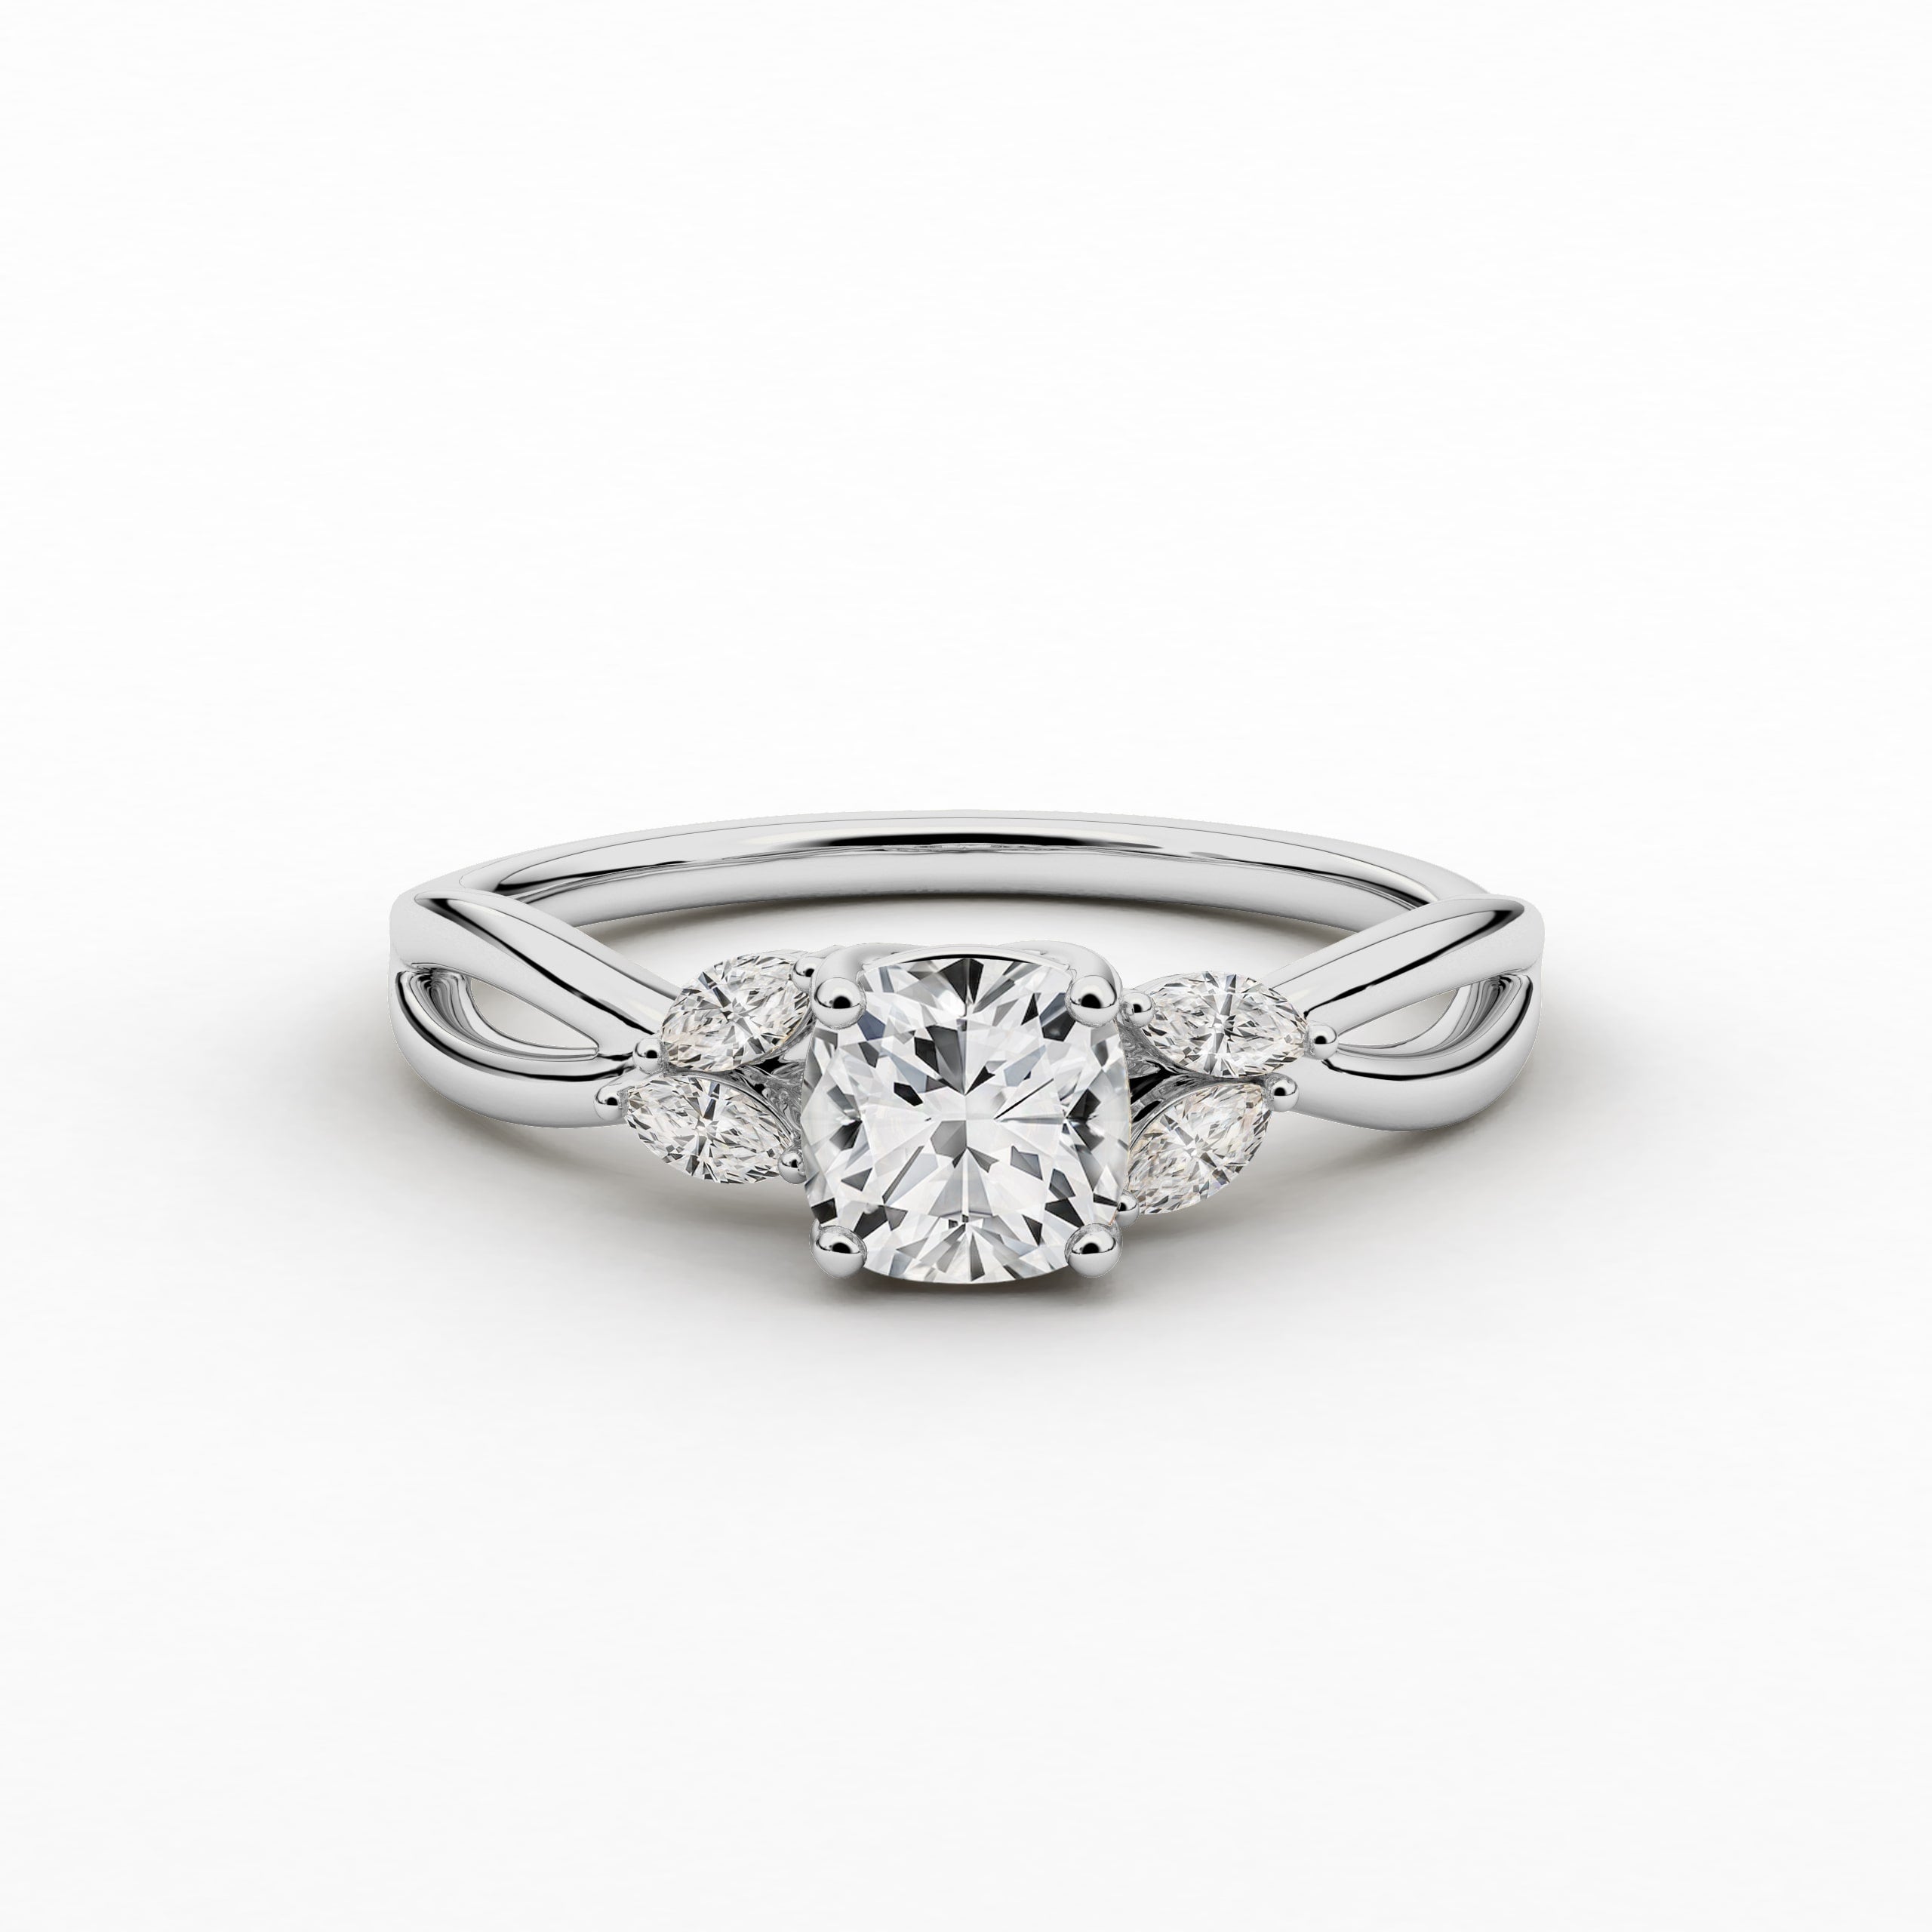 Cushion Cut Marquise diamond Petite Engagement Rings with White Diamond in White Gold